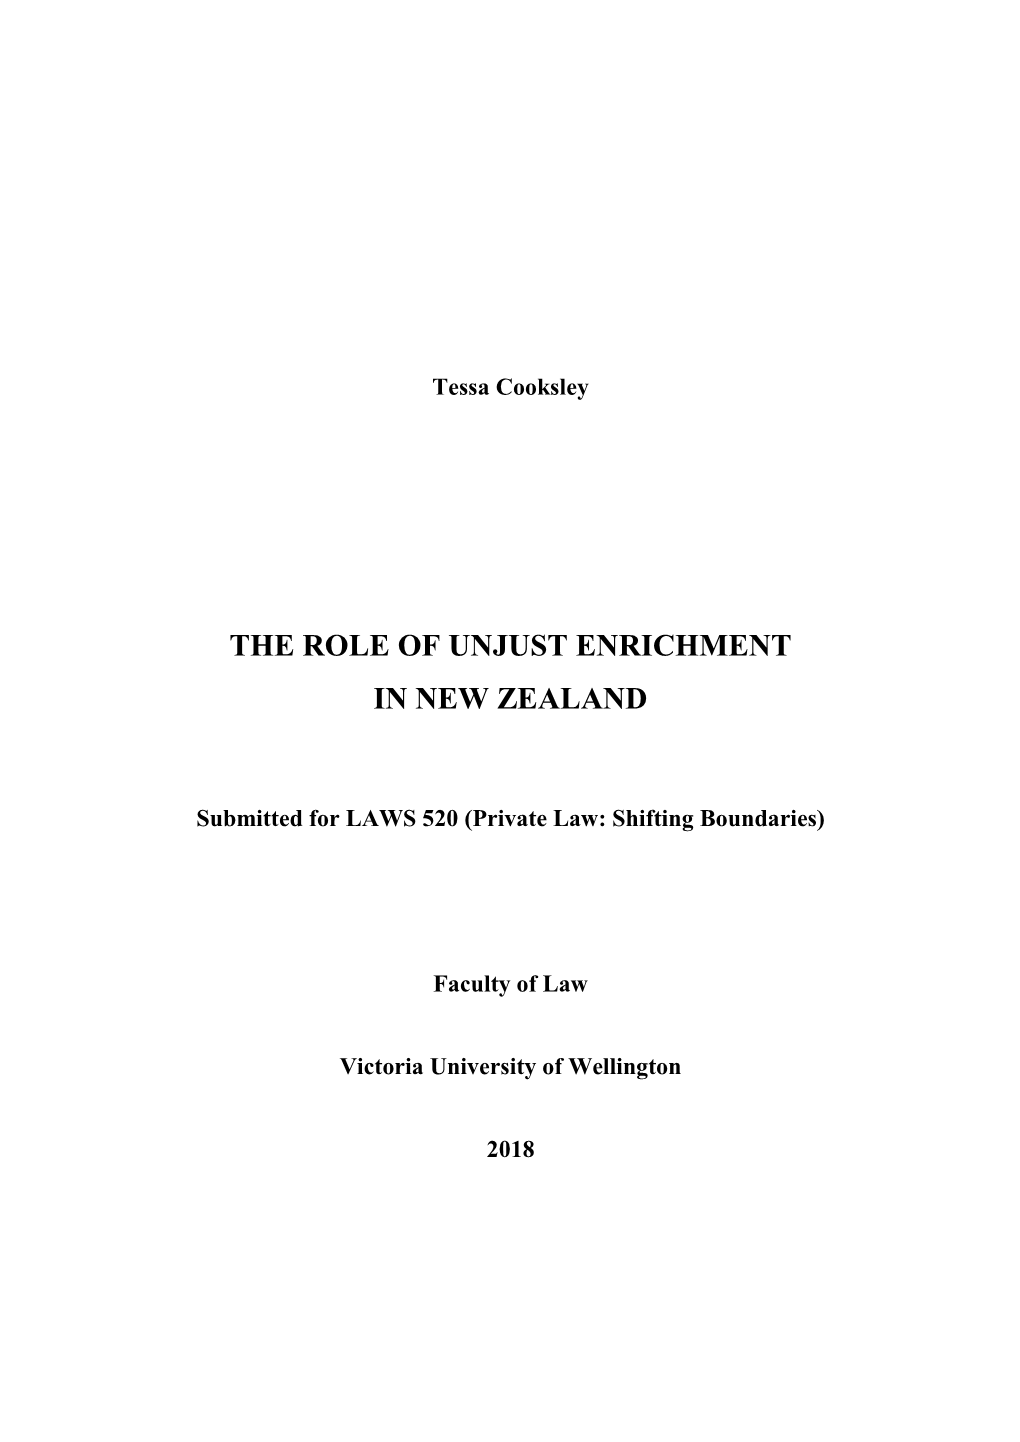 The Role of Unjust Enrichment in New Zealand